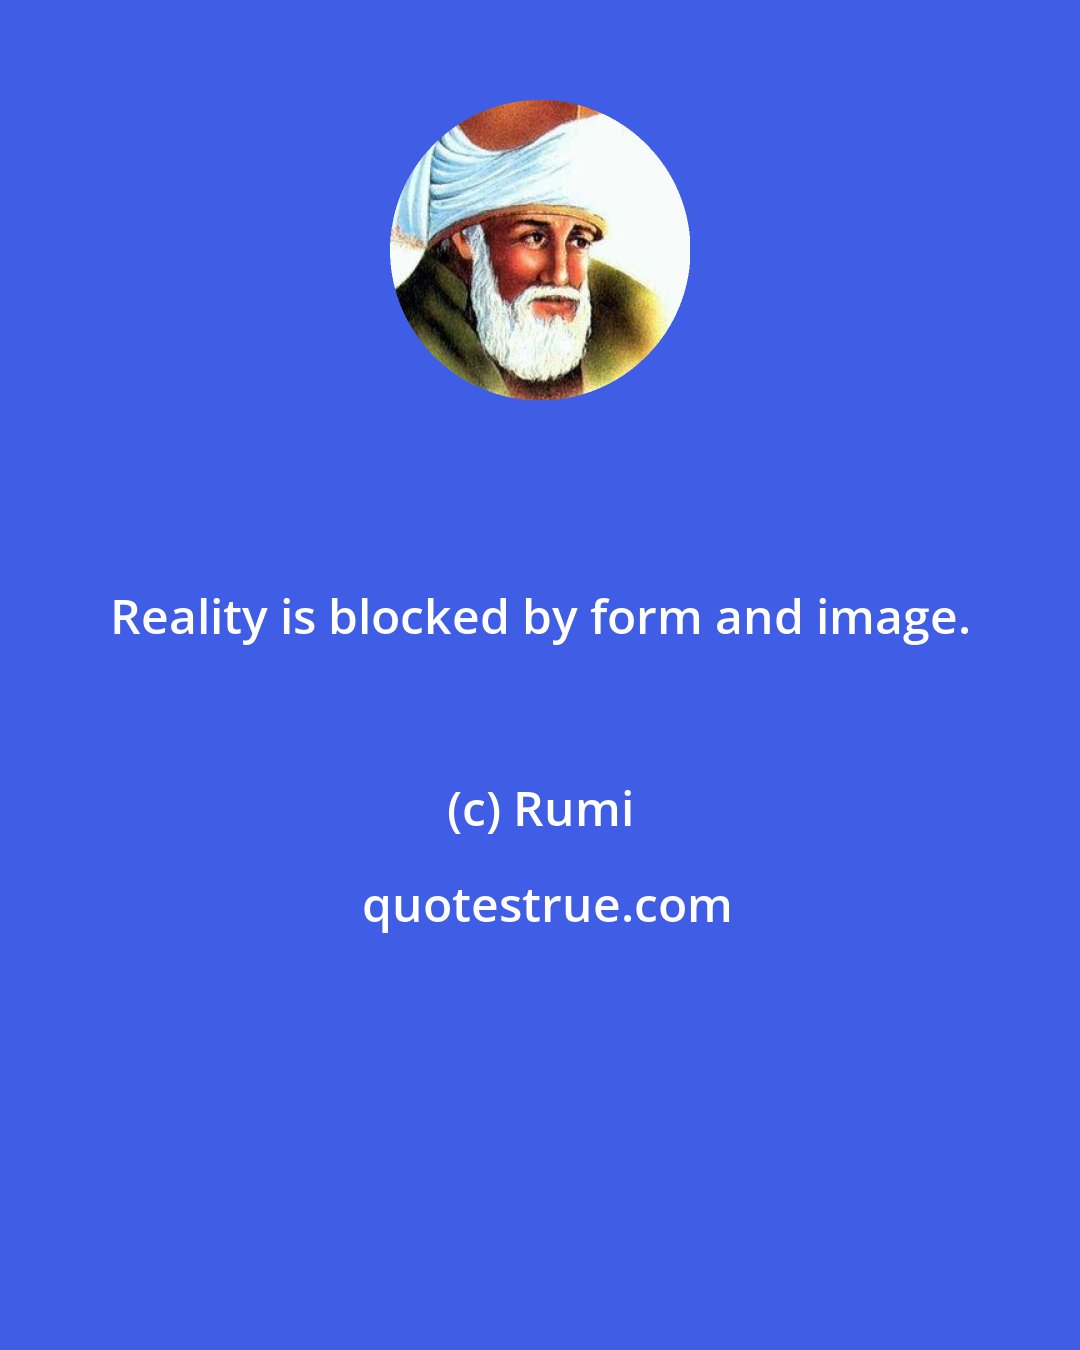 Rumi: Reality is blocked by form and image.